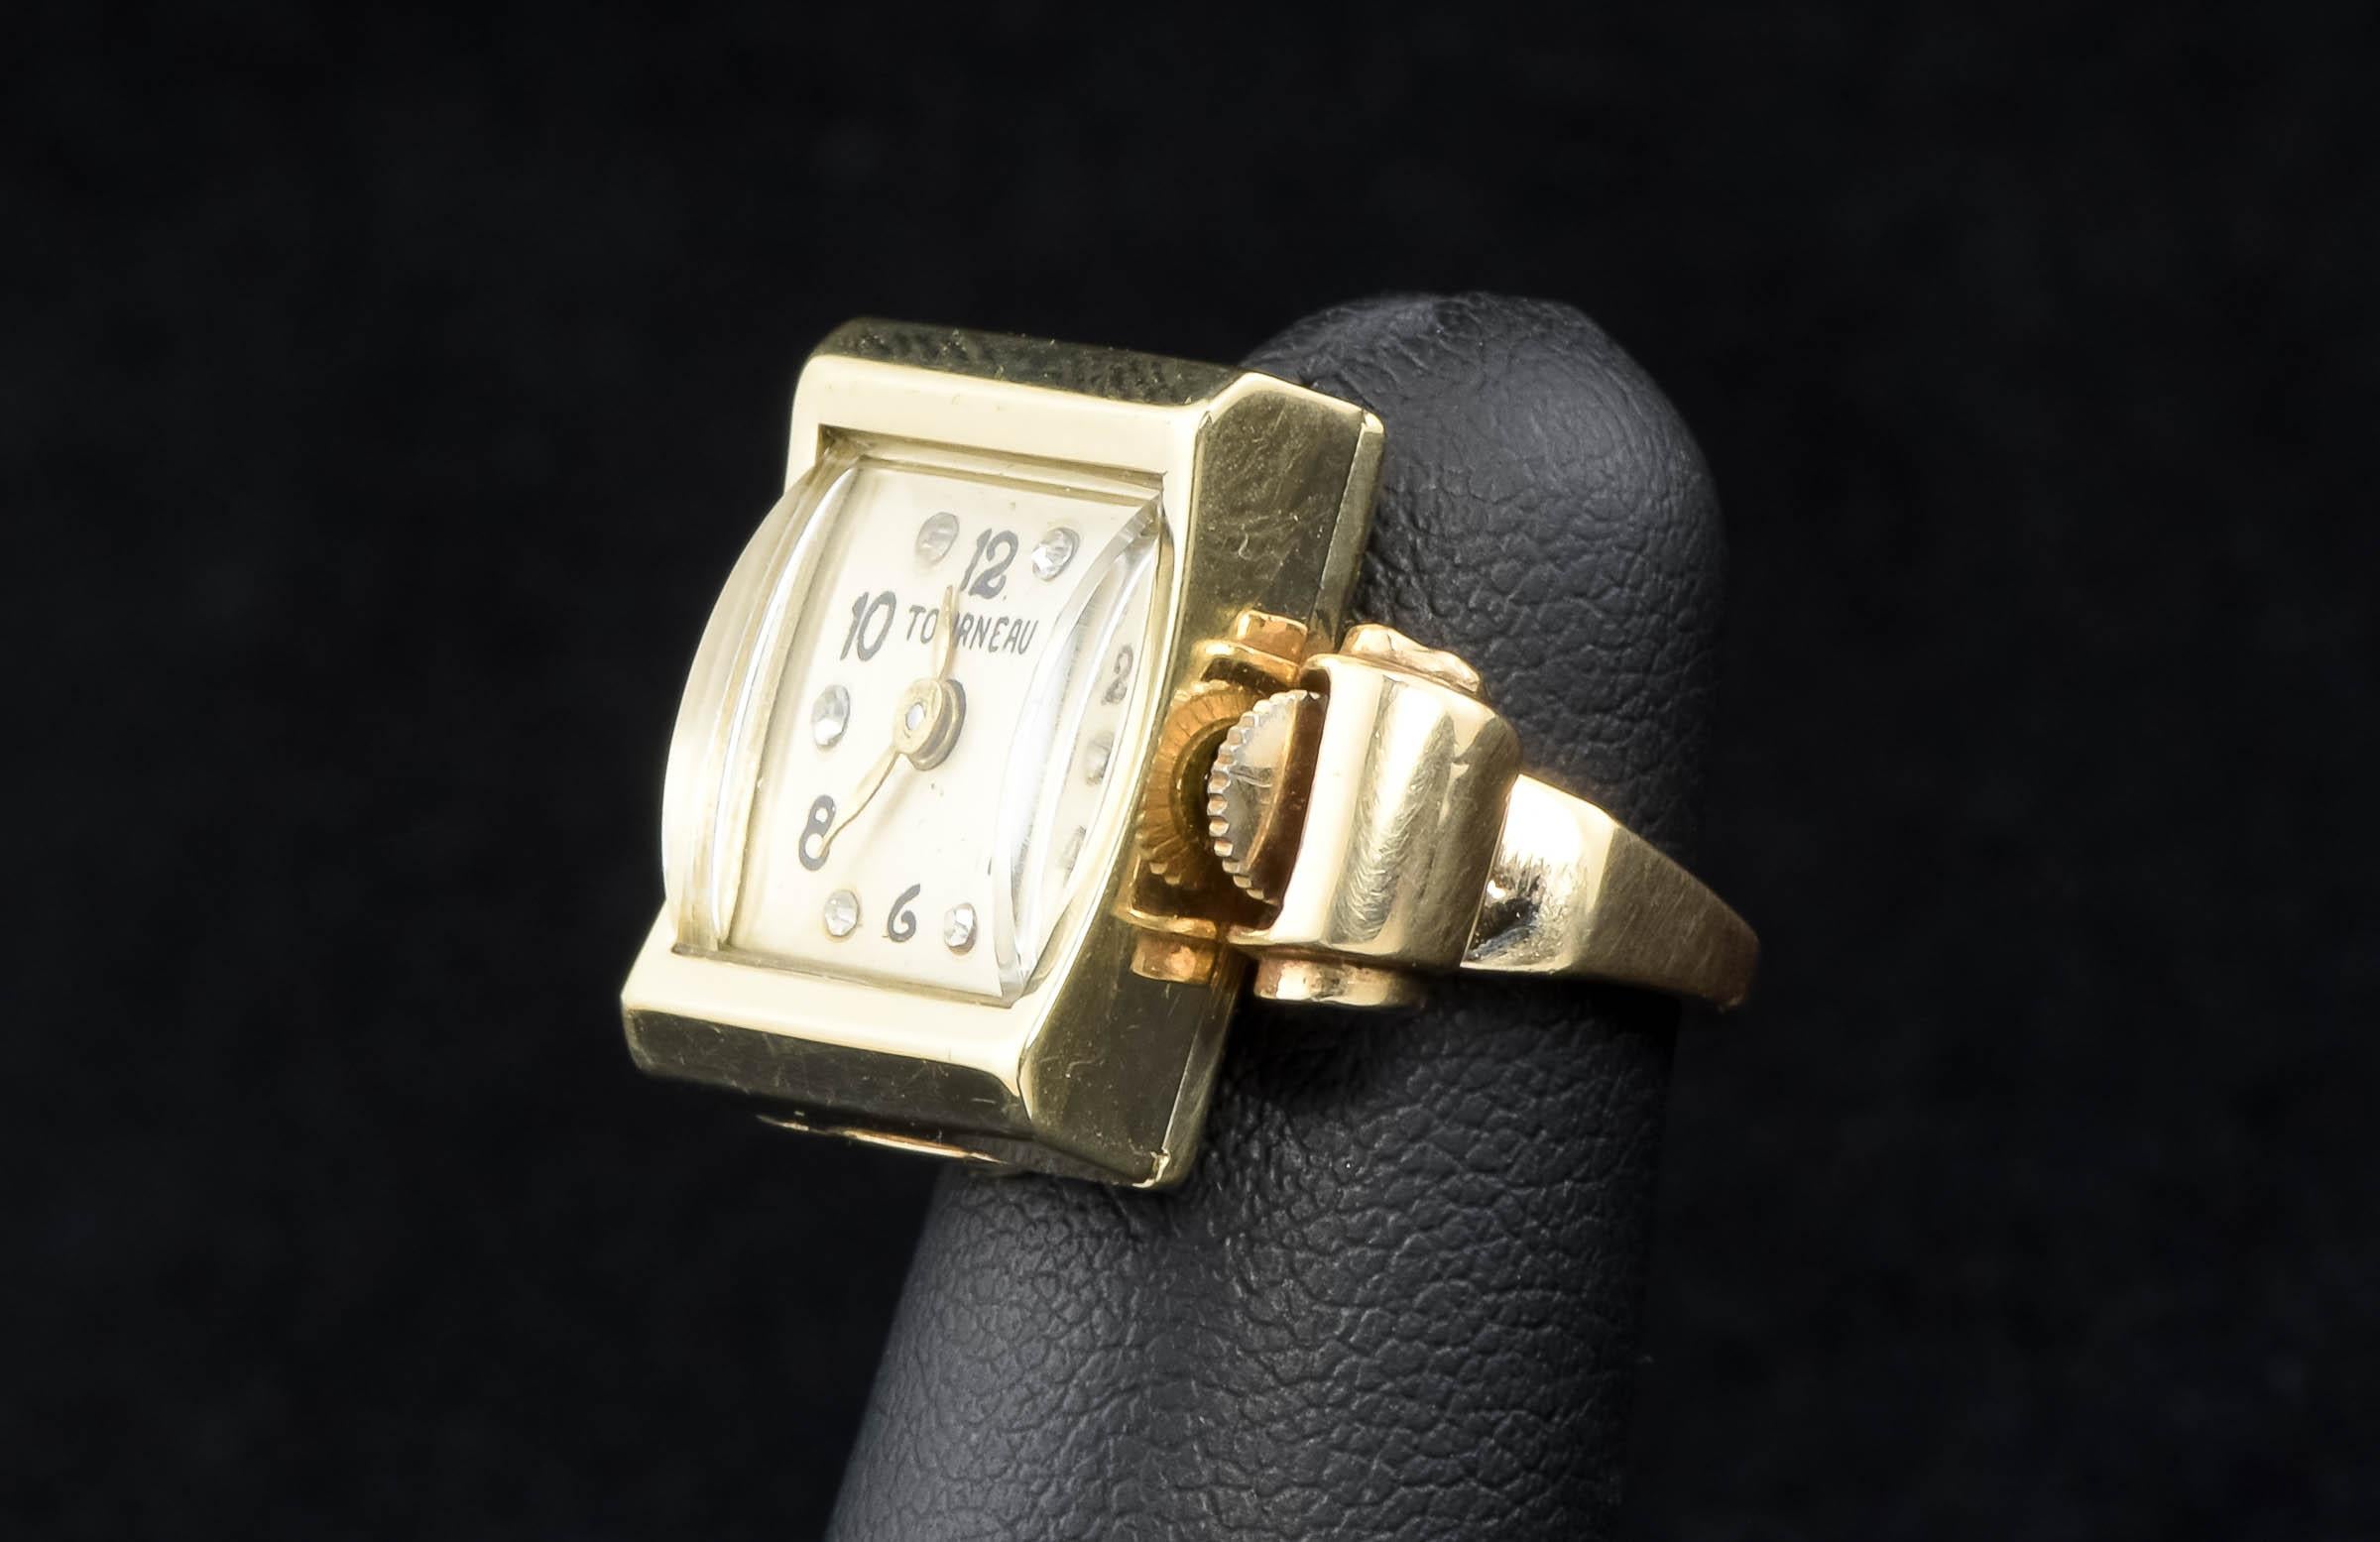 With great retro 1940's to Mid Century style, this solid gold watch ring was originally offered by fine watch retailer Tourneau.

Crafted of solid 14K gold, the watch has a chunky gold band and a curved crystal that really gives it great period